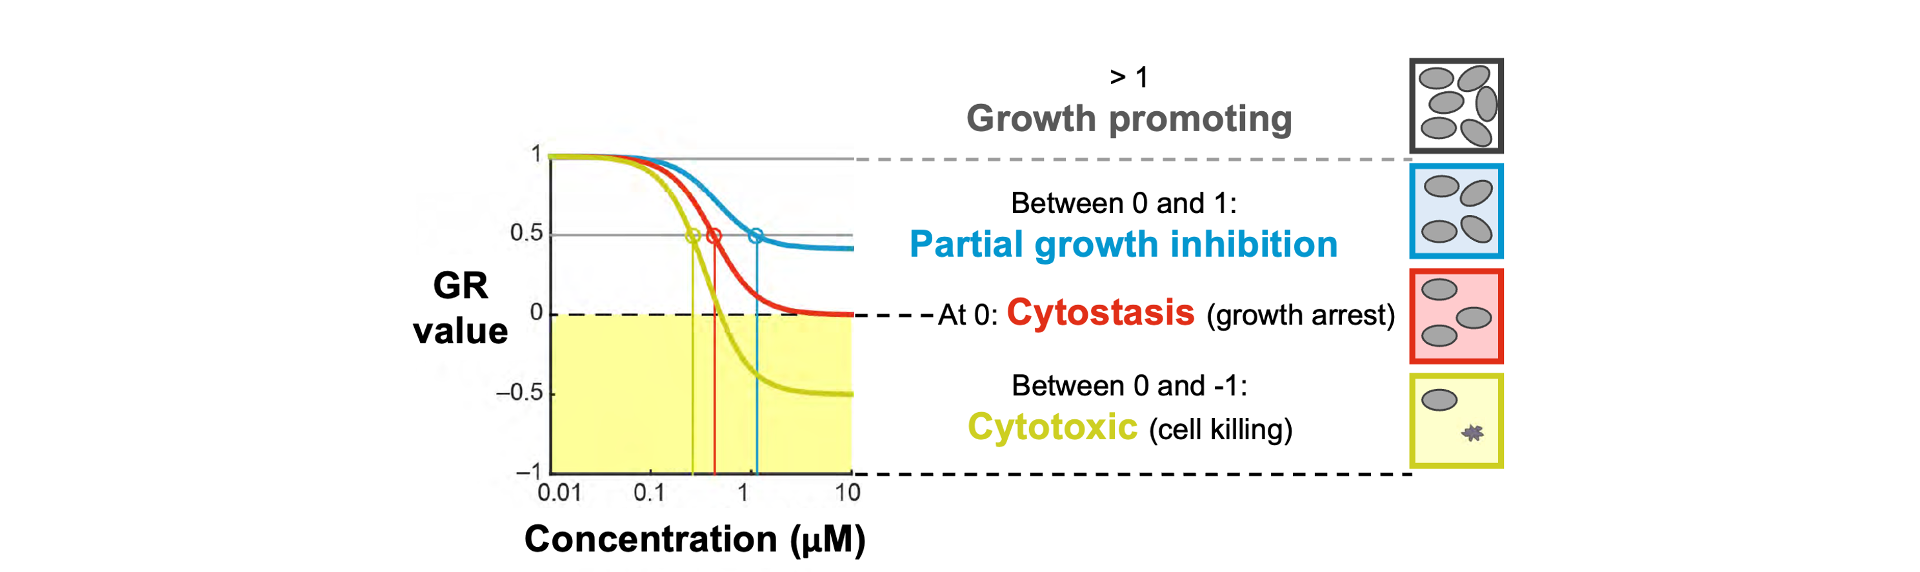 The GR value relates naturally to a treatment's effects on cell population growth. For partially cytostatic treatments (where growth is slowed, but not completely halted) GR values fall between 1 and 0. A GR value of zero represents cytostasis, or completely halted population growth. Cytotoxic treatments (where cell population declines) produce GR values between 0 and -1. Finally, a GR value of greater than one signifies a treatment that promotes growth.